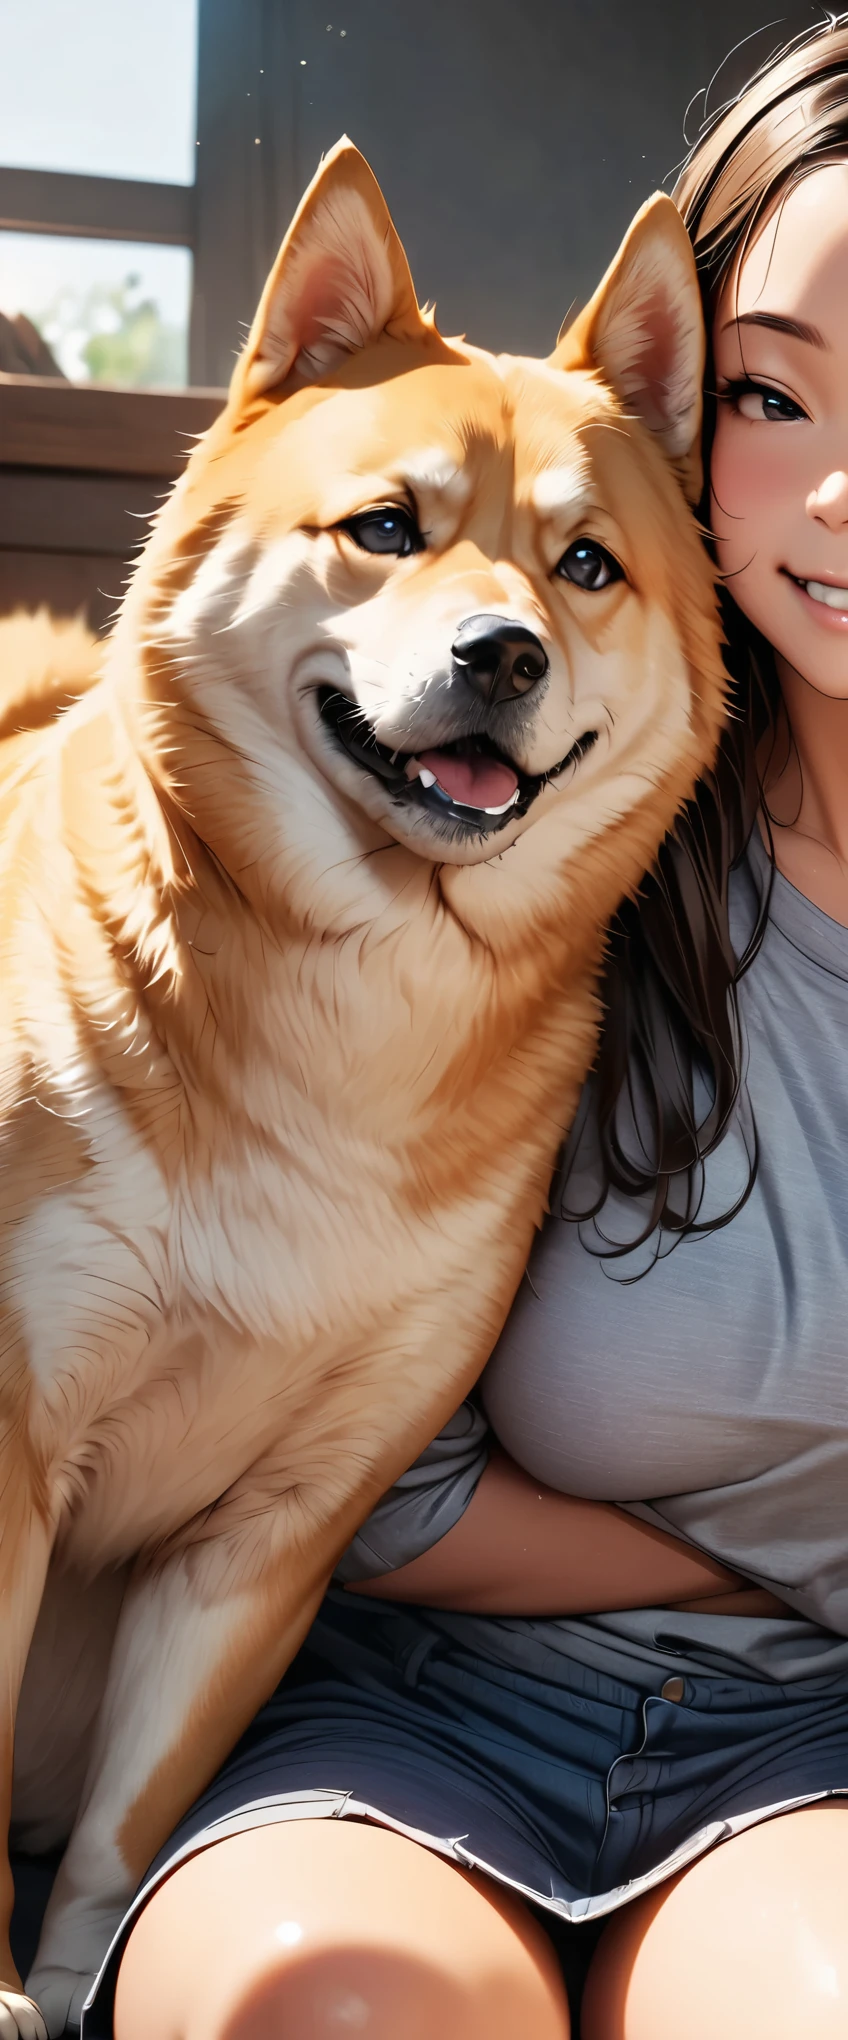 ((Masterpiece, top quality, high resolution)), ((highly detailed CG unified 8K wallpaper)), A Shiba Inu, ((masterpiece, highest quality, Highest image quality, High resolution, photorealistic, Raw photo, 8K)), ((Extremely detailed CG unified 8k wallpaper)), close up photo of a shiba, A woman playing with a Shiba Inu, Cute and sitting,